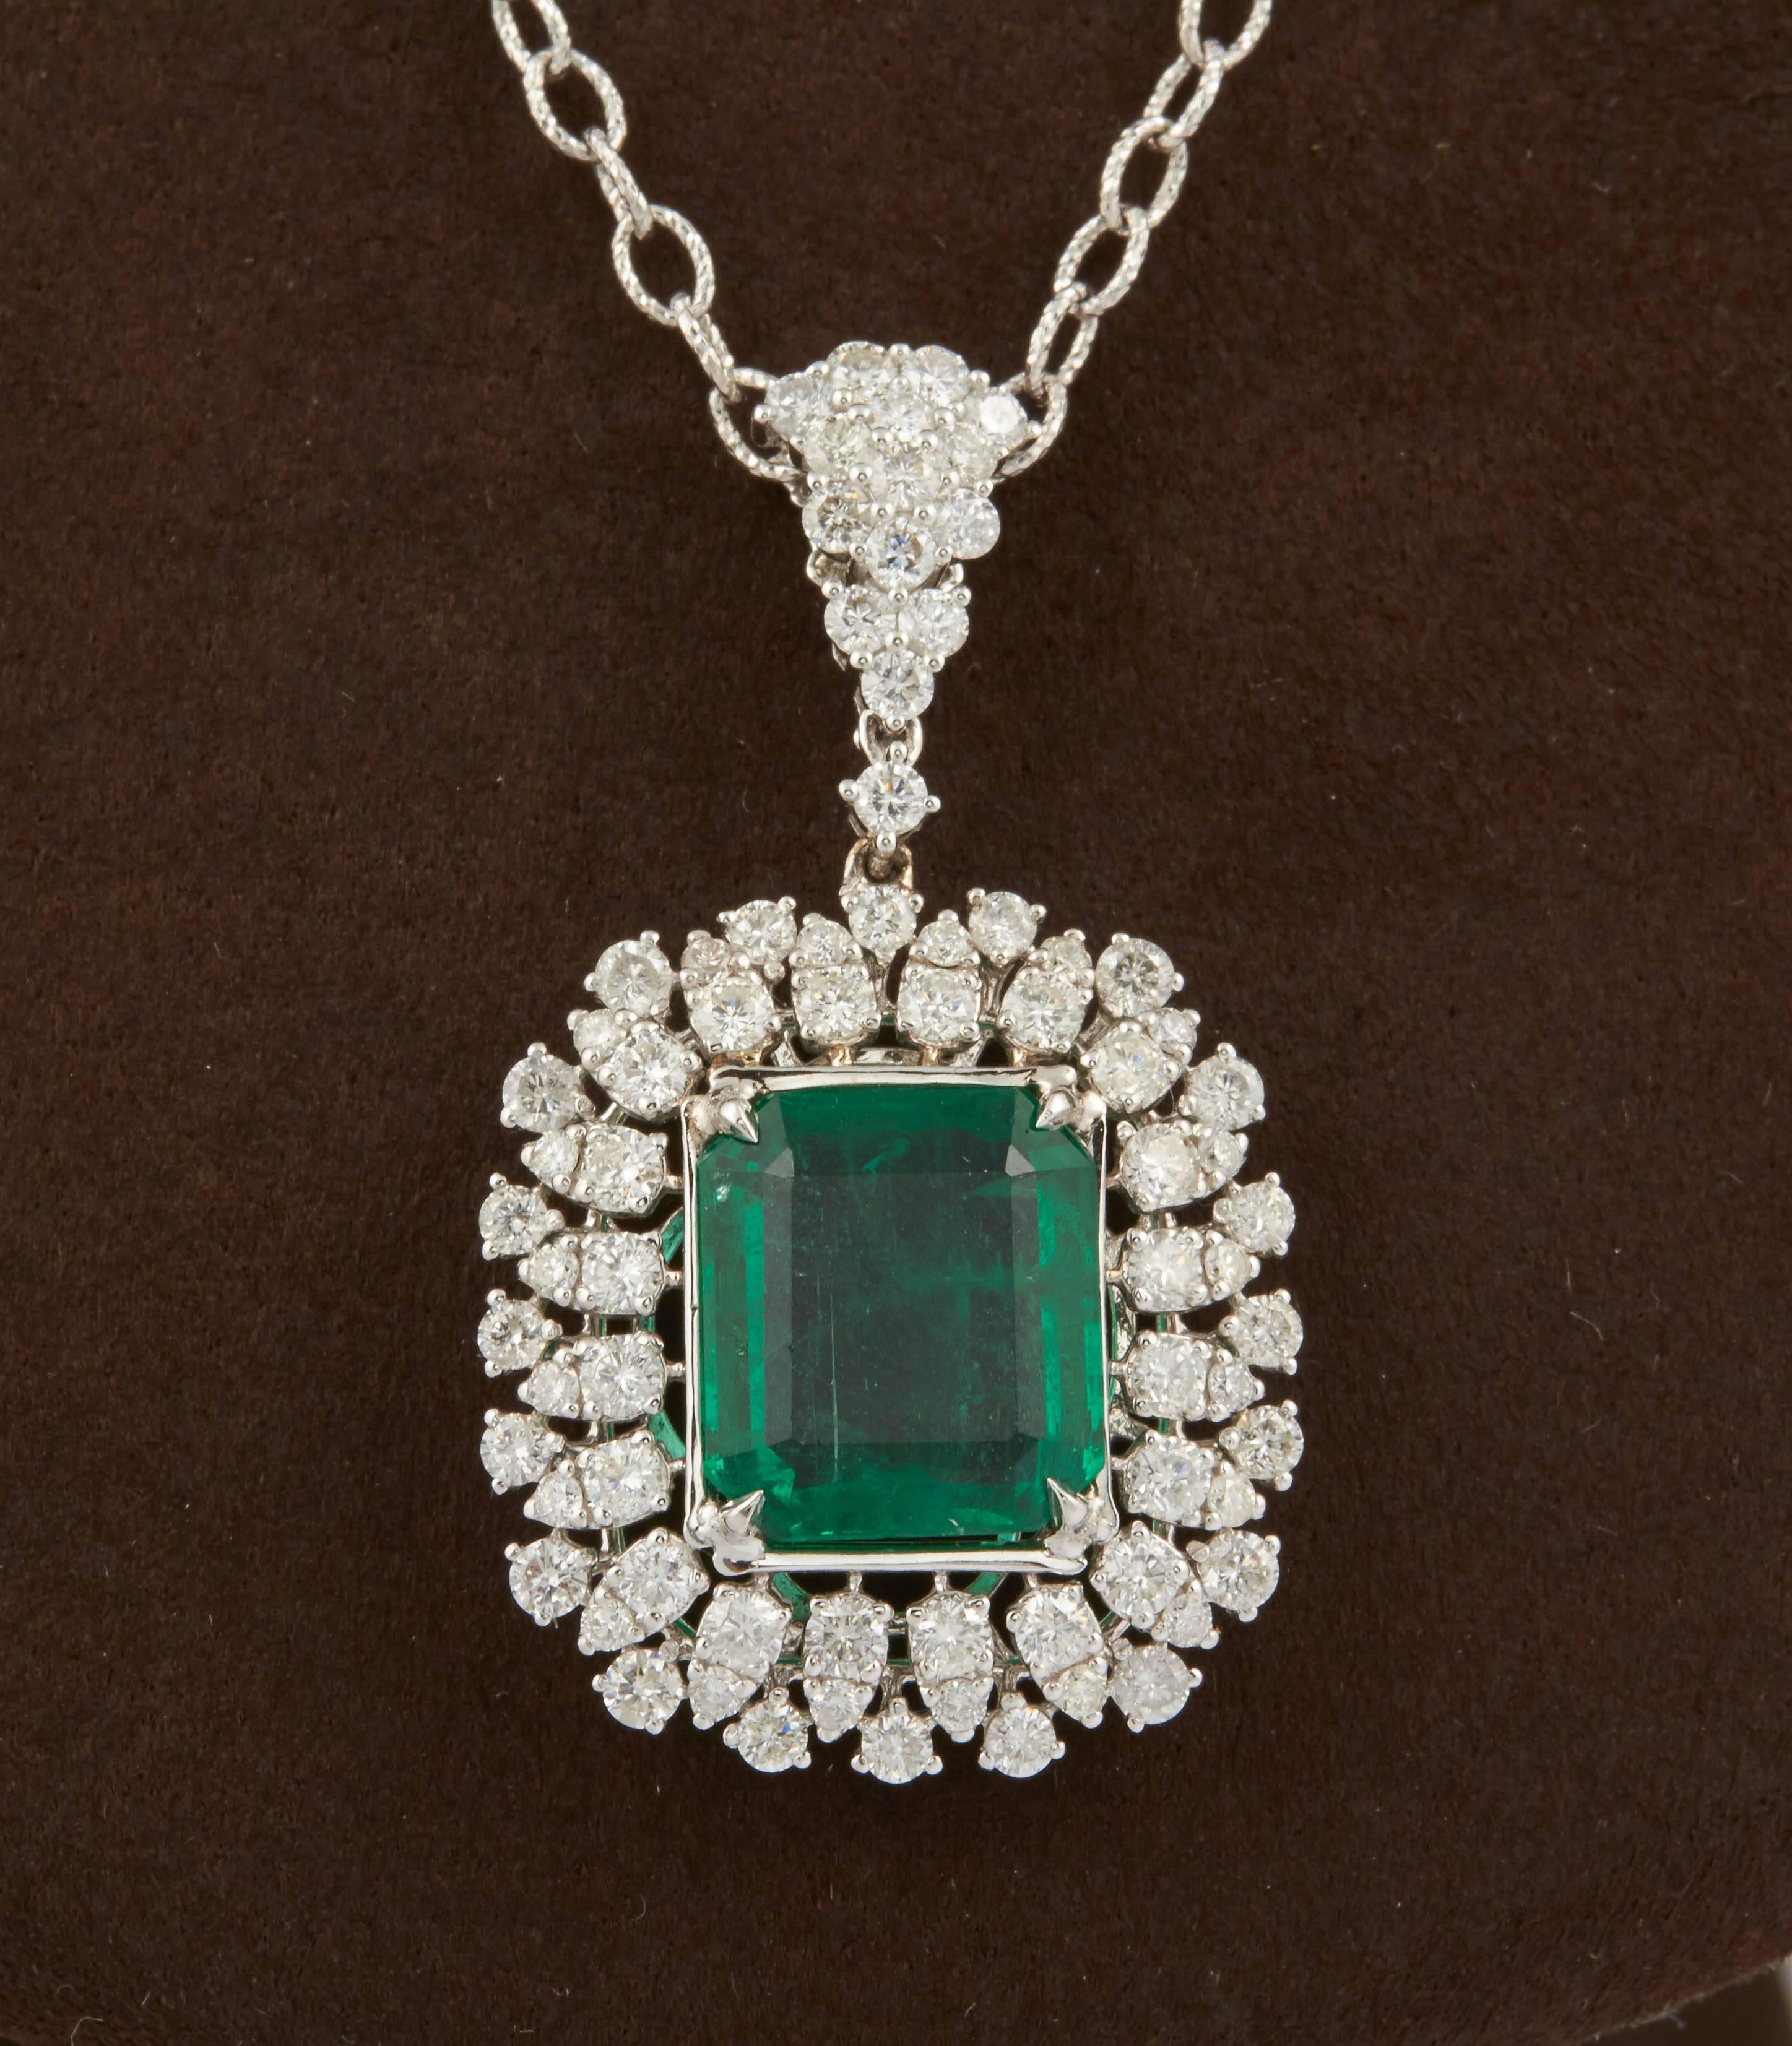 

A stunning pendant!

5.95 carat fine Green Emerald with rich color and luster surrounded by white diamonds.

2.85 carats of white round brilliant cut diamonds.

16 inch 14k white gold fancy chain. 

The pendant portion is approximately an inch